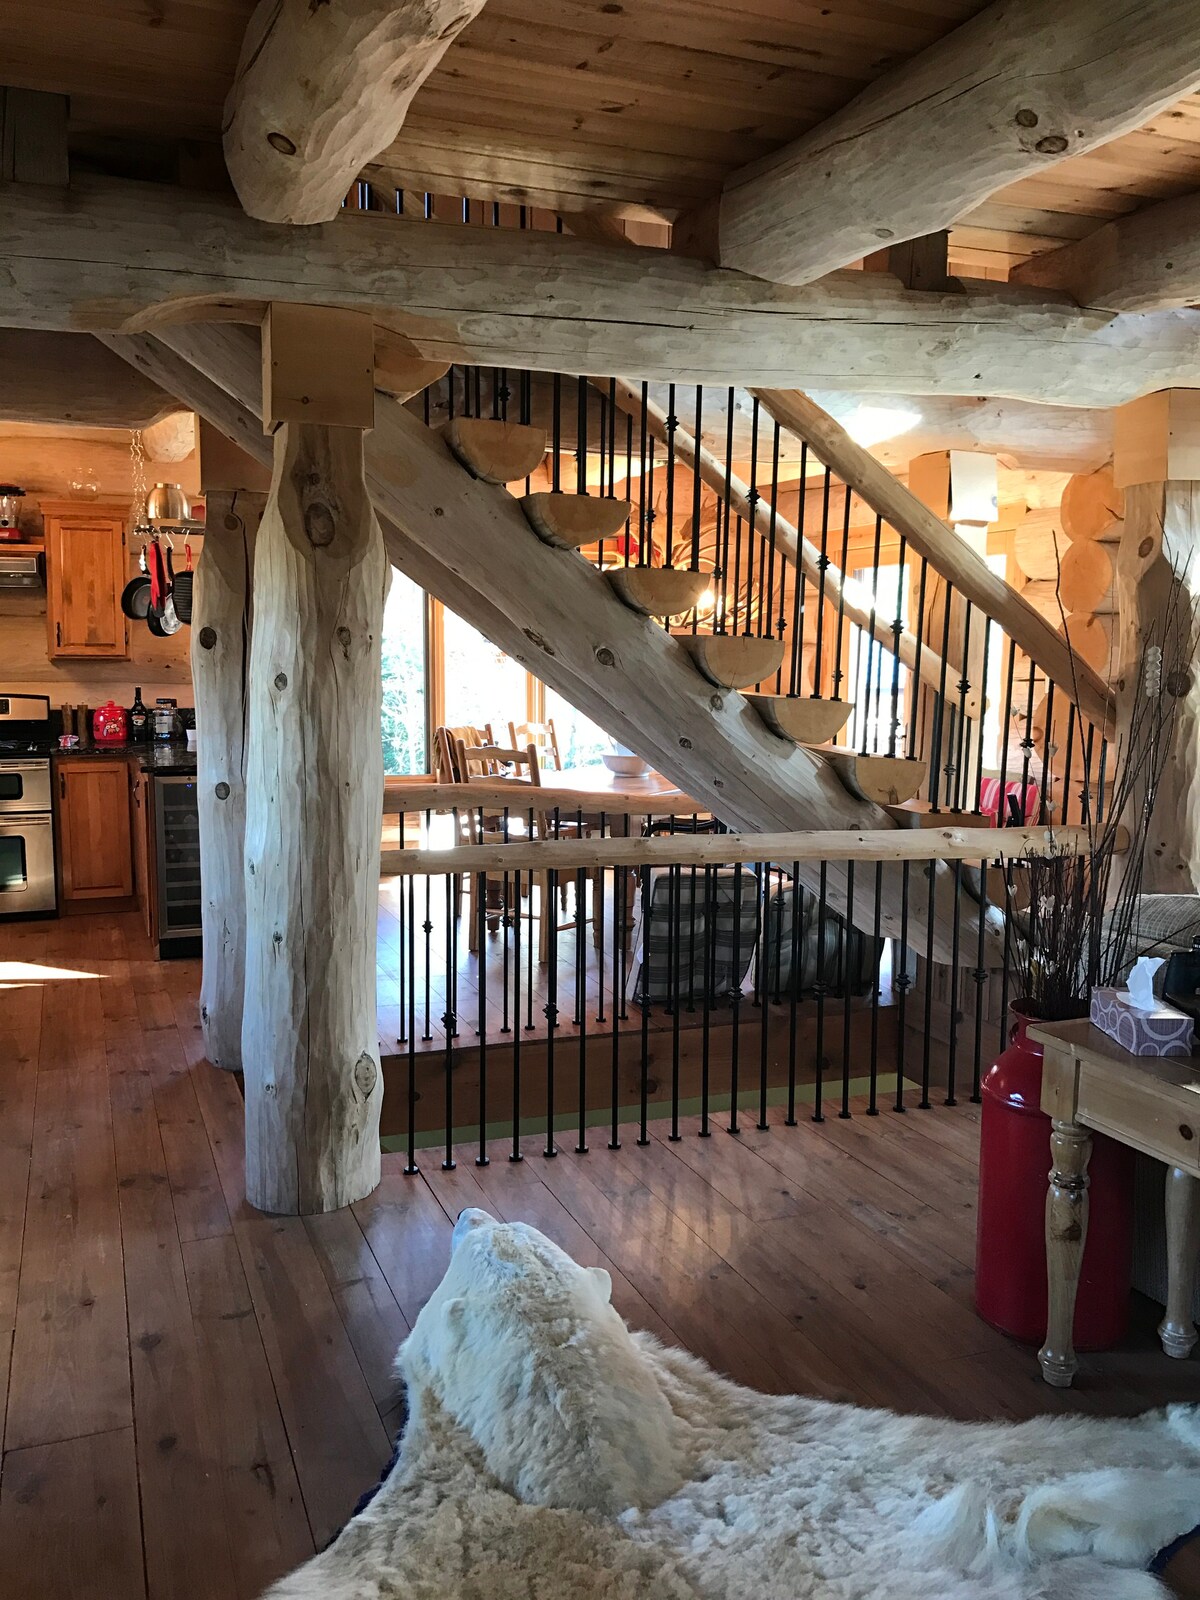 Beautiful log house for rent. Dogs are welcome!